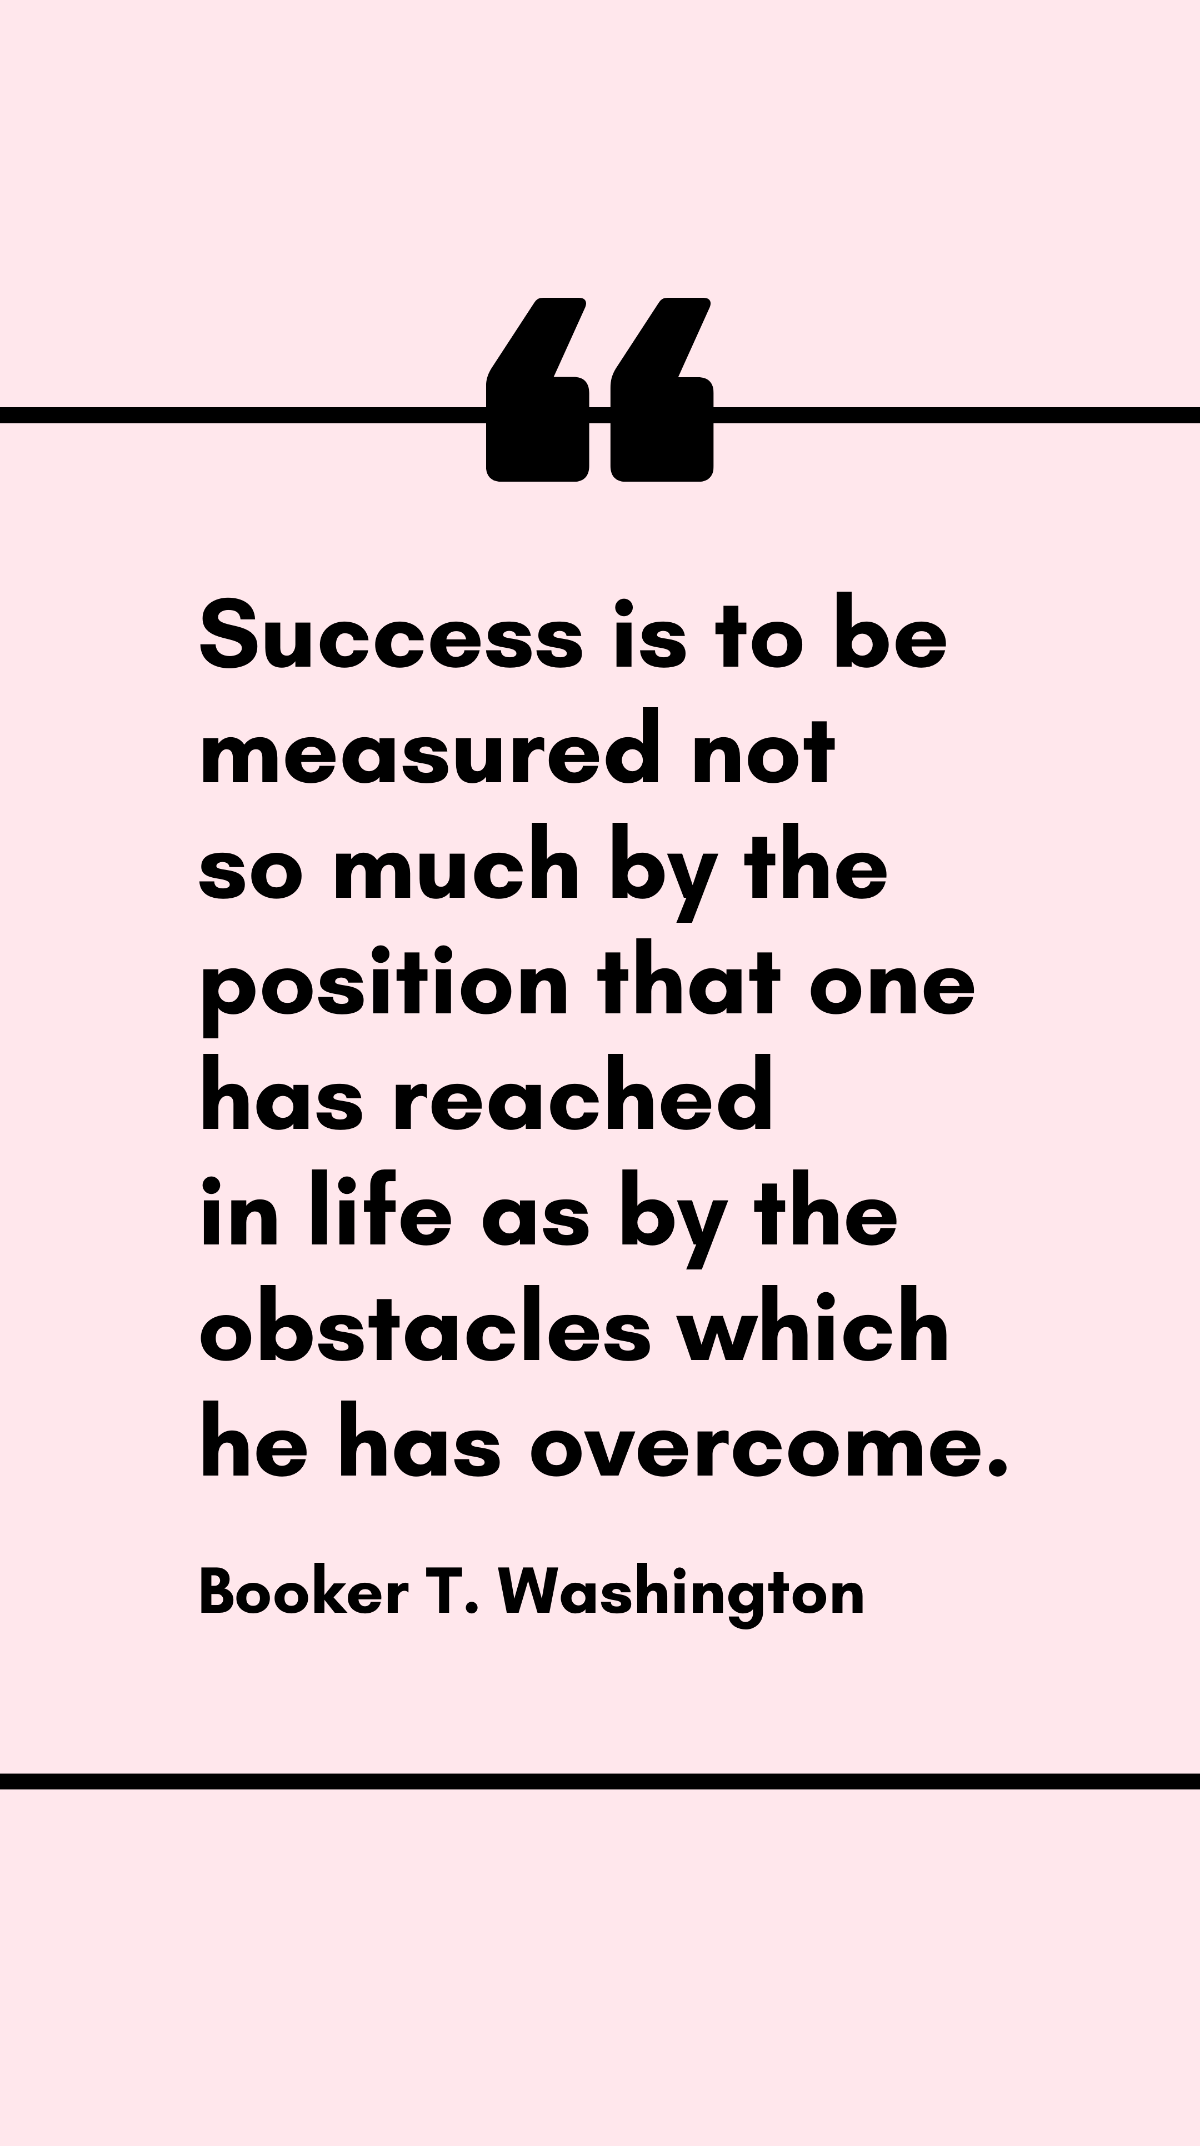 Booker T. Washington - Success is to be measured not so much by the position that one has reached in life as by the obstacles which he has overcome. Template